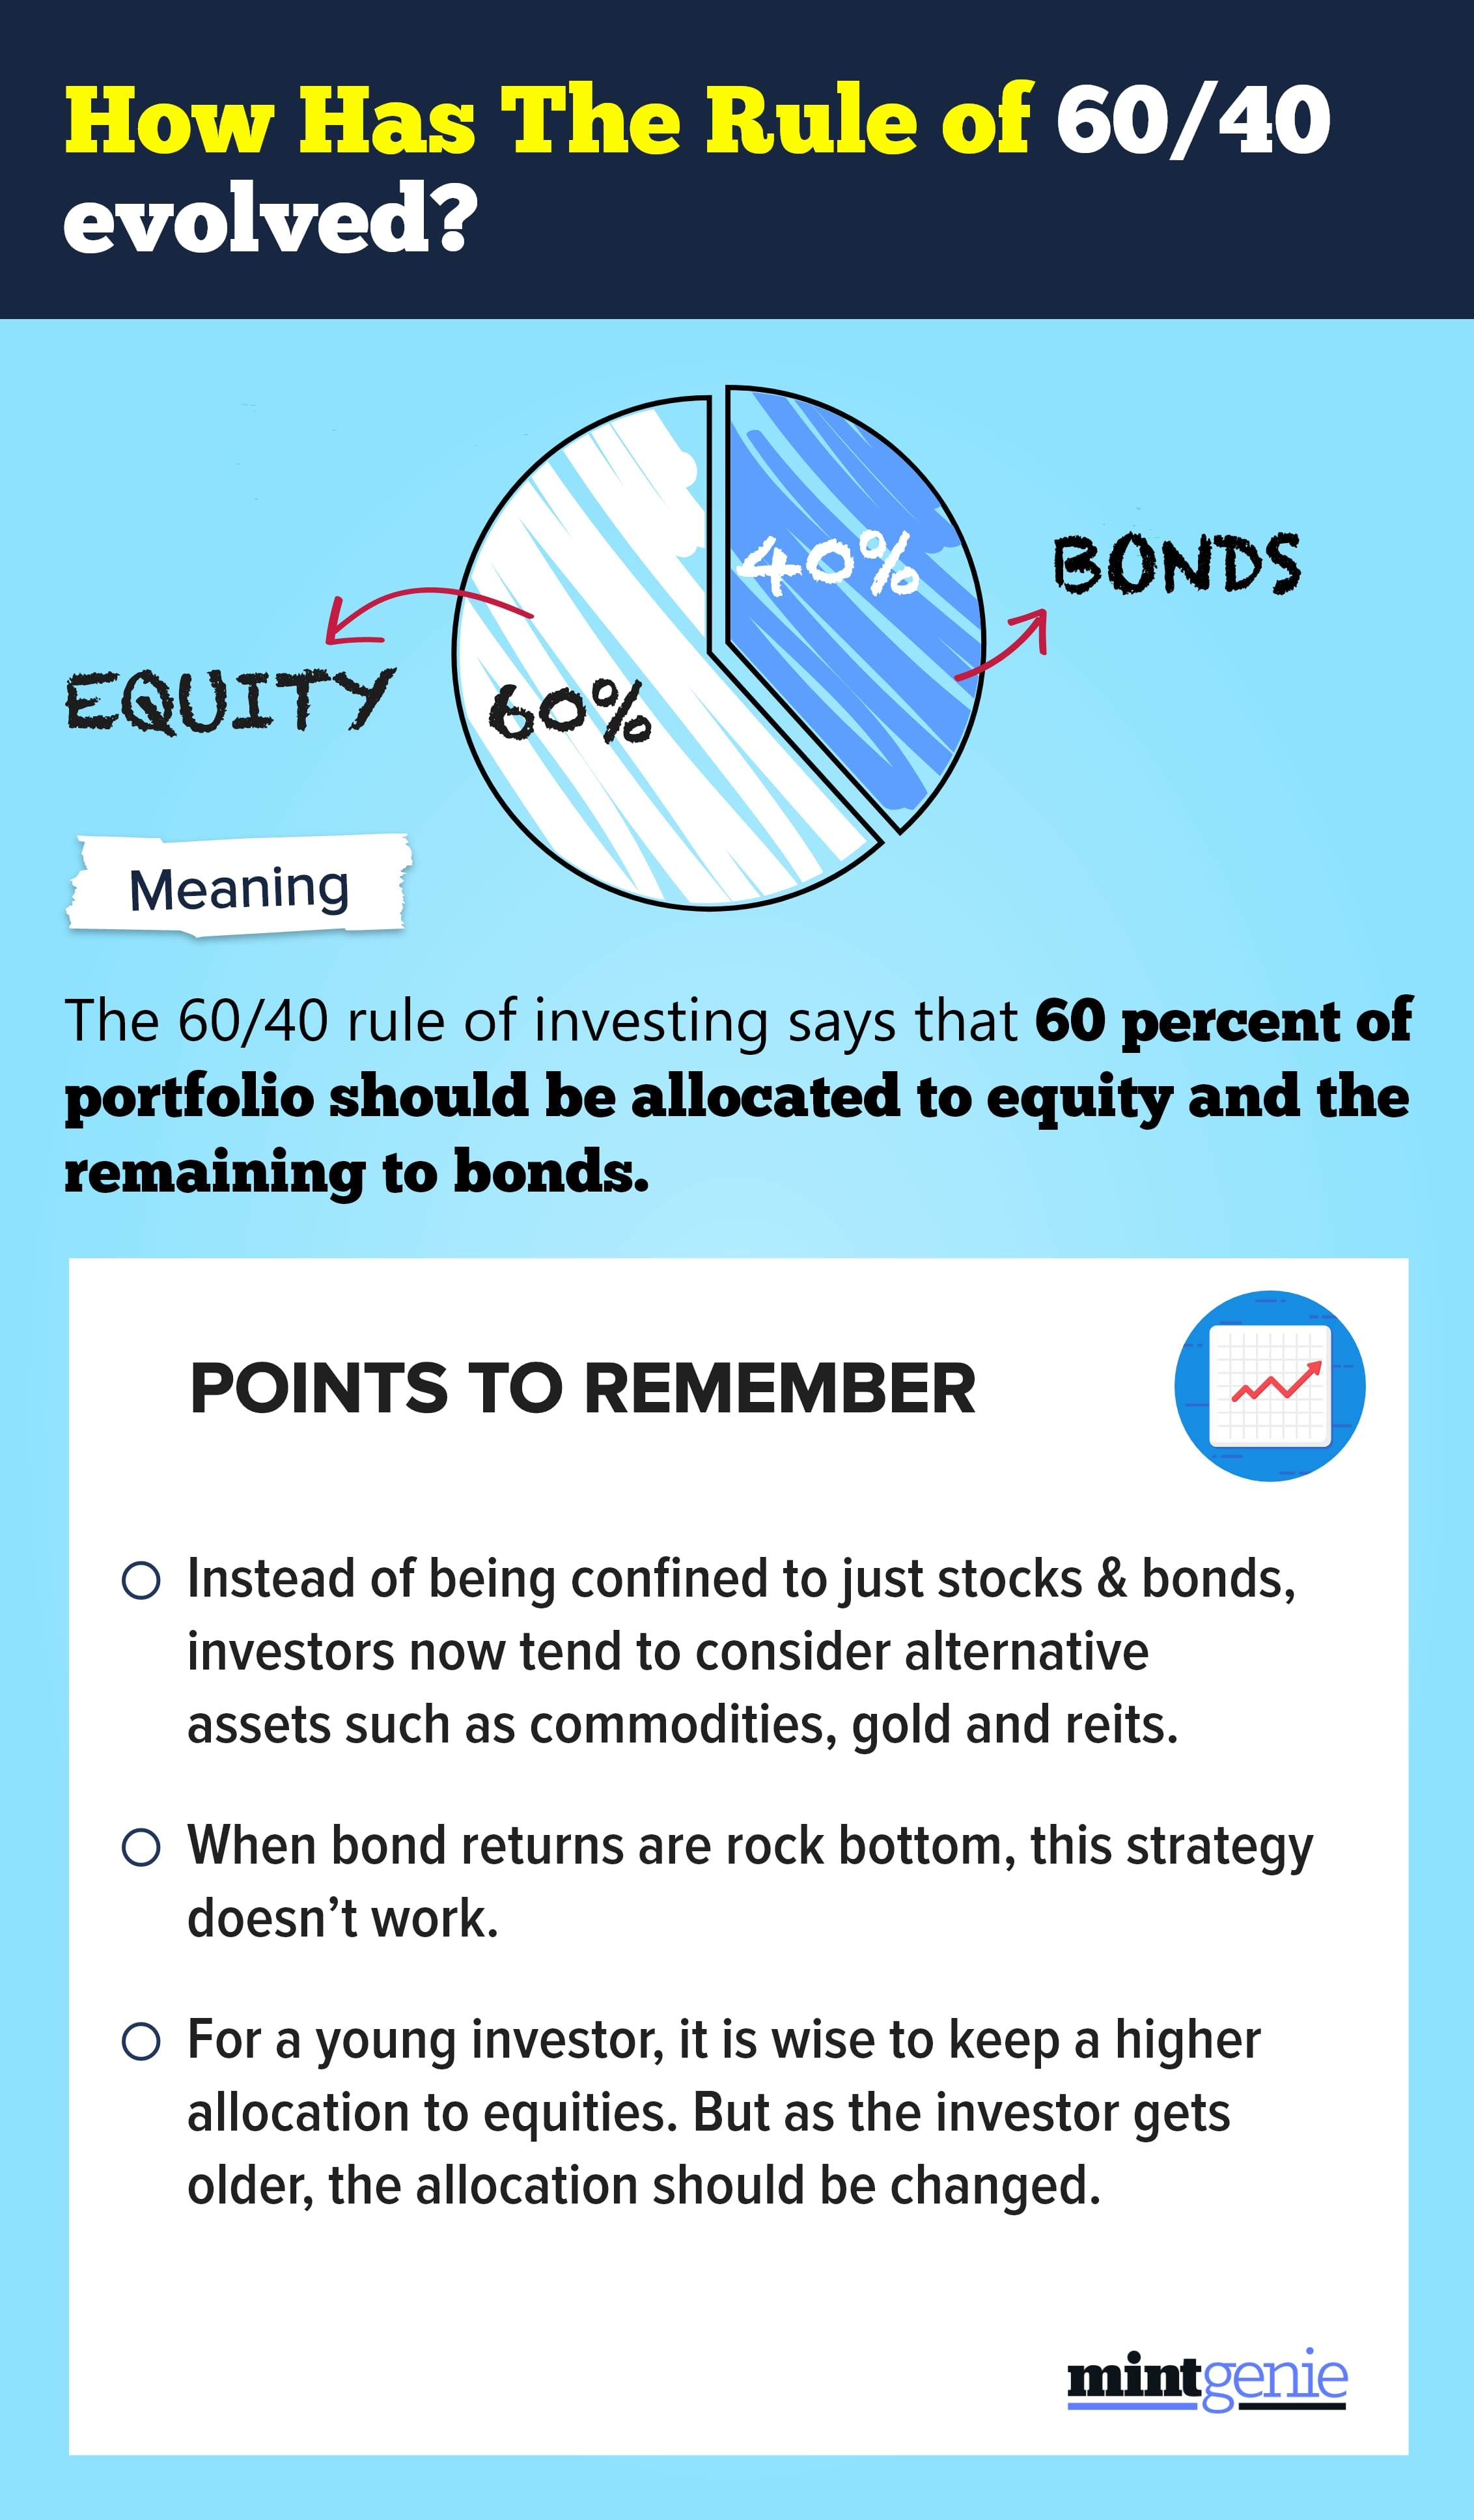 Usually the strategy of 60/40 doesn't work when the bond returns are rock bottom.